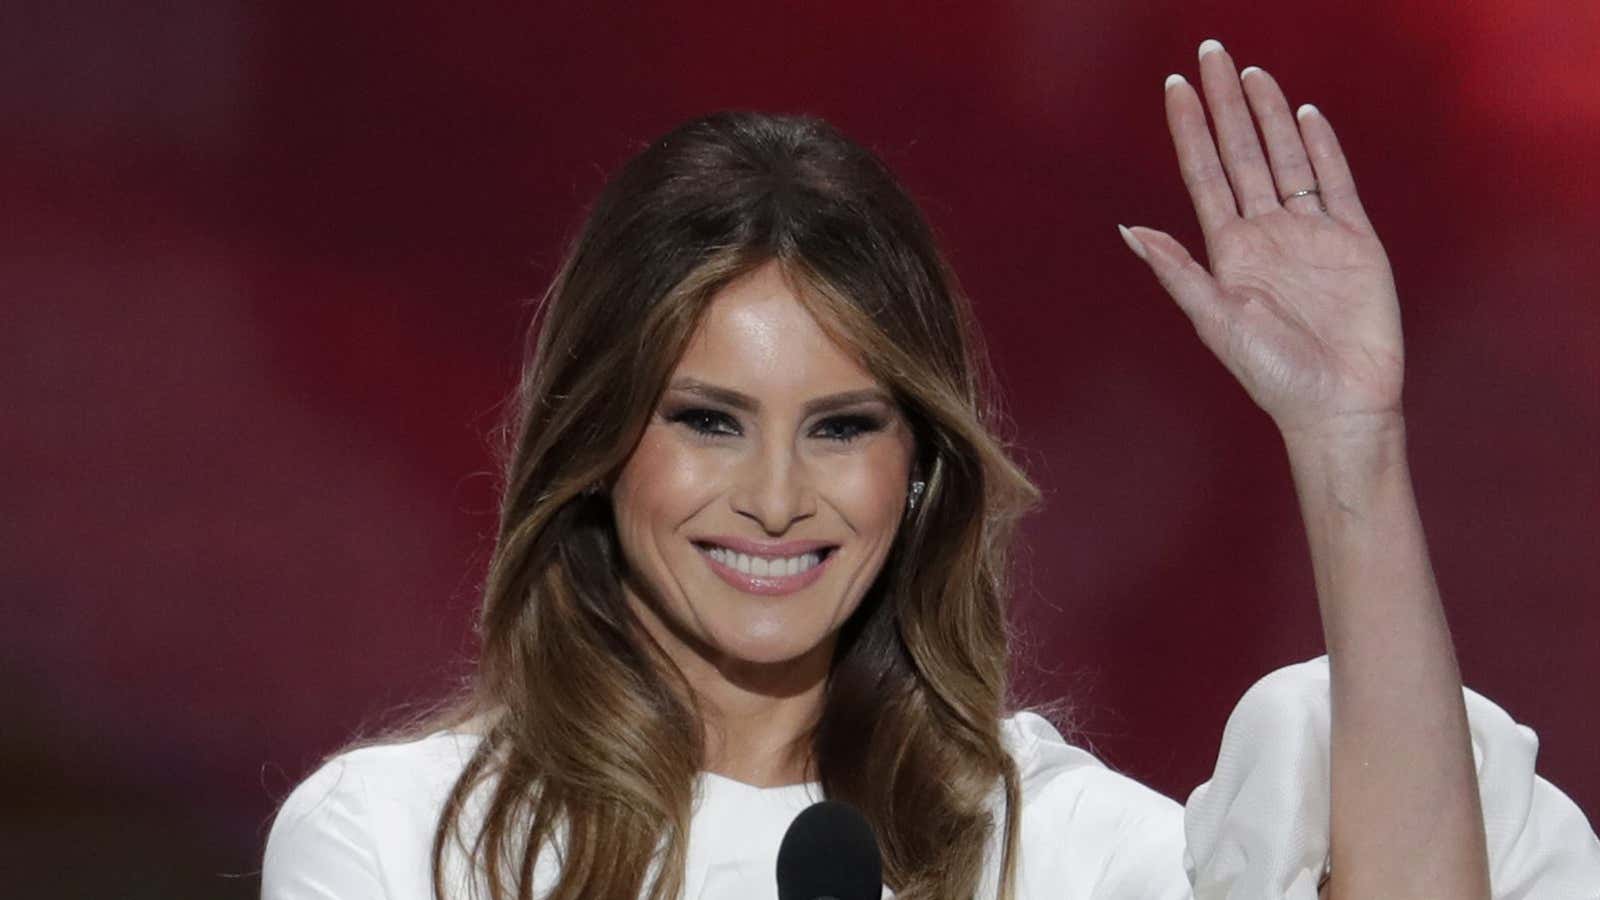 Melania Trump at the Republican National Convention, not Laura  Benanti on the Late Show with Stephen Colbert